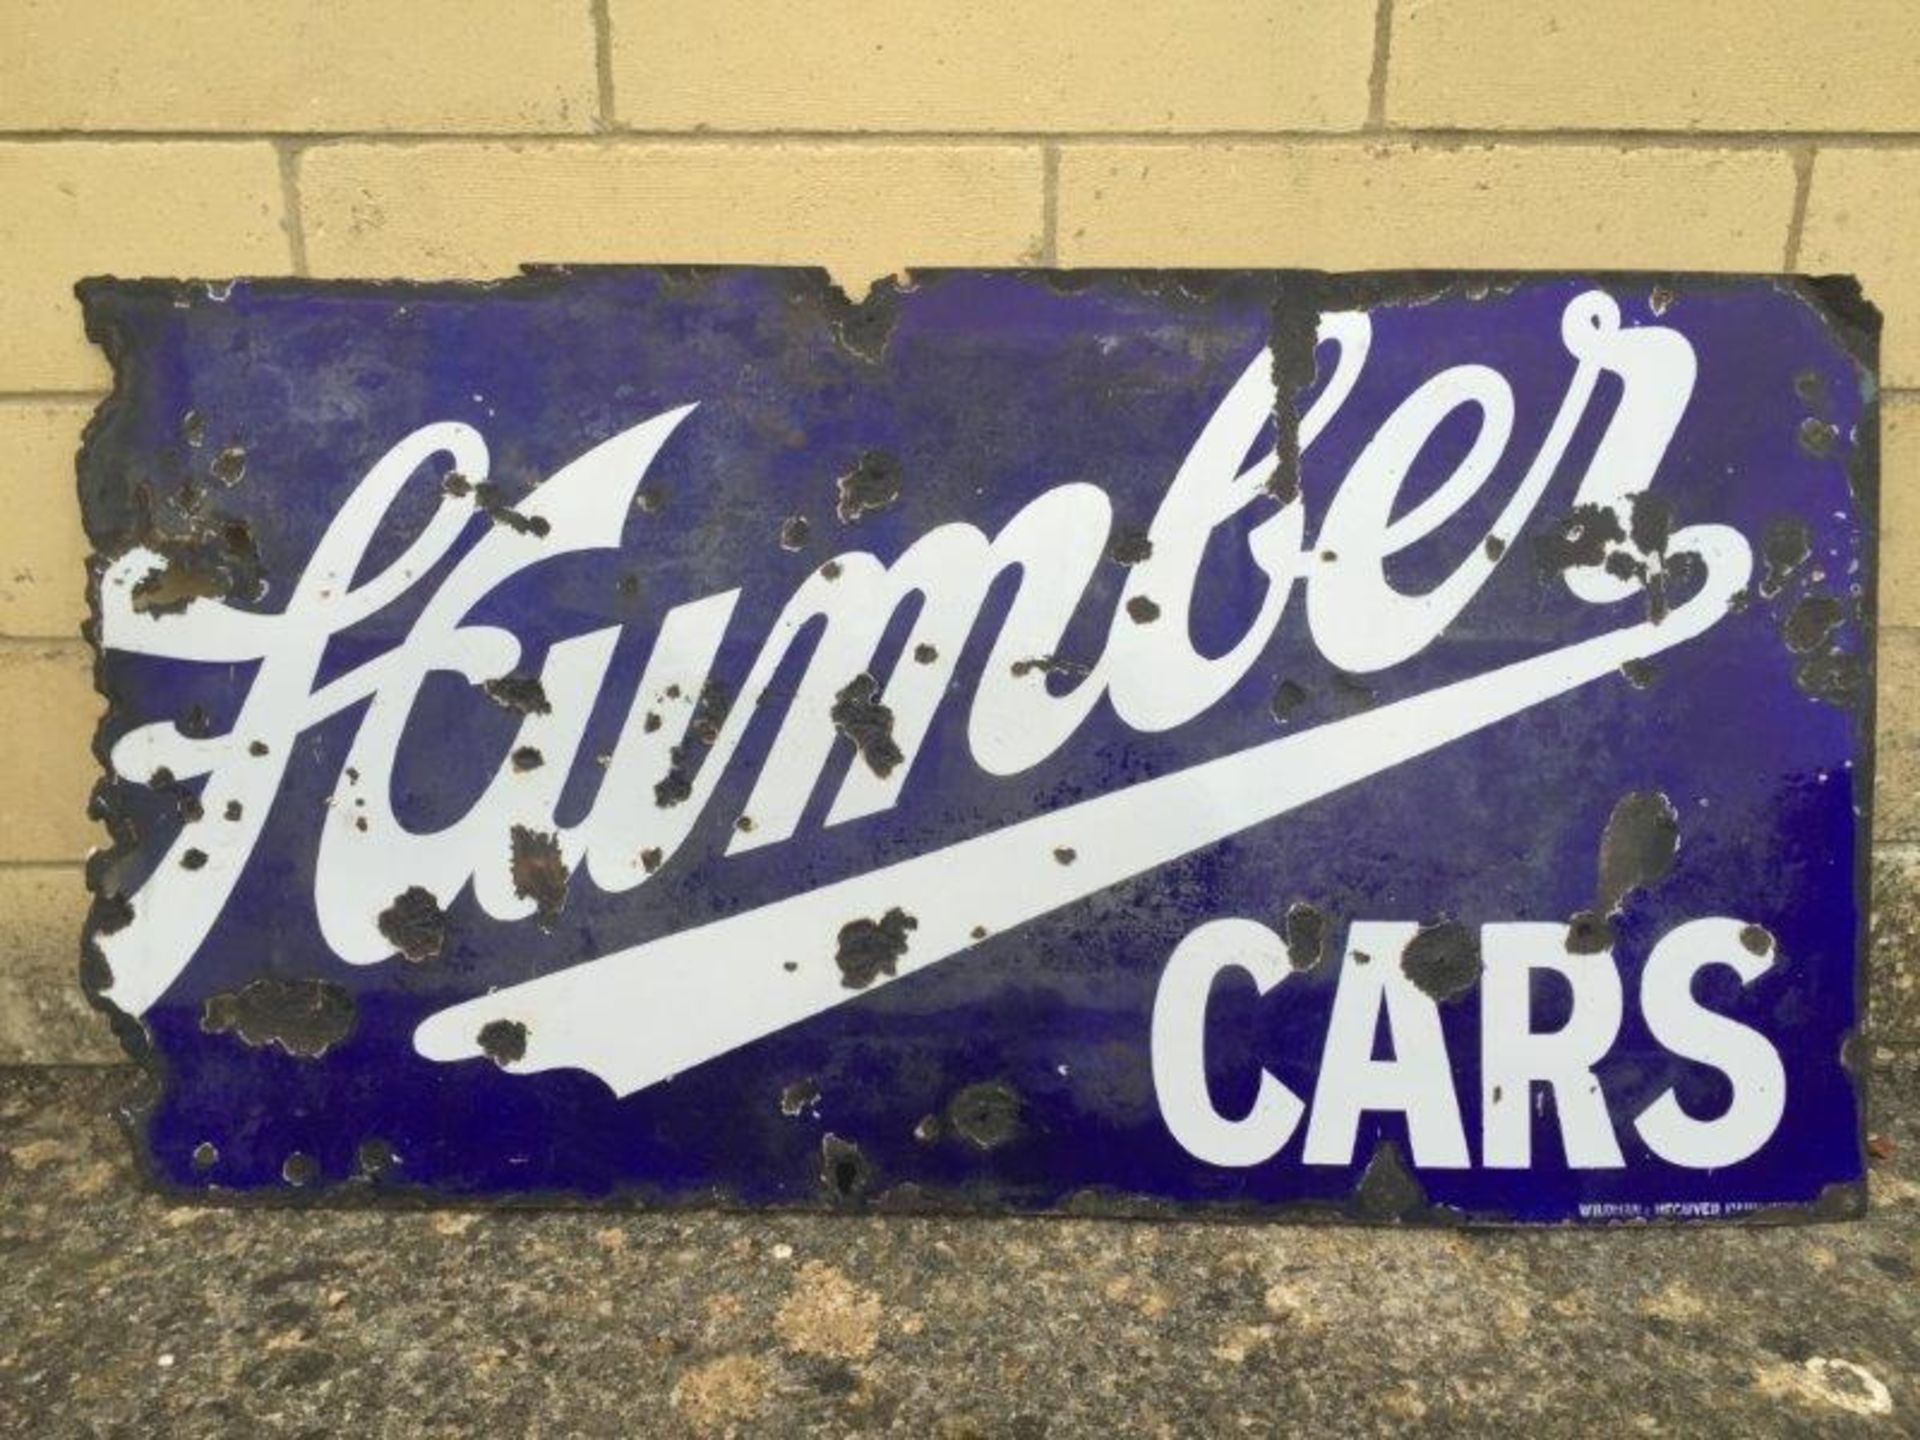 A Humber Cars rectangular enamel sign by Wildman and Meguyer, 44 x 23".